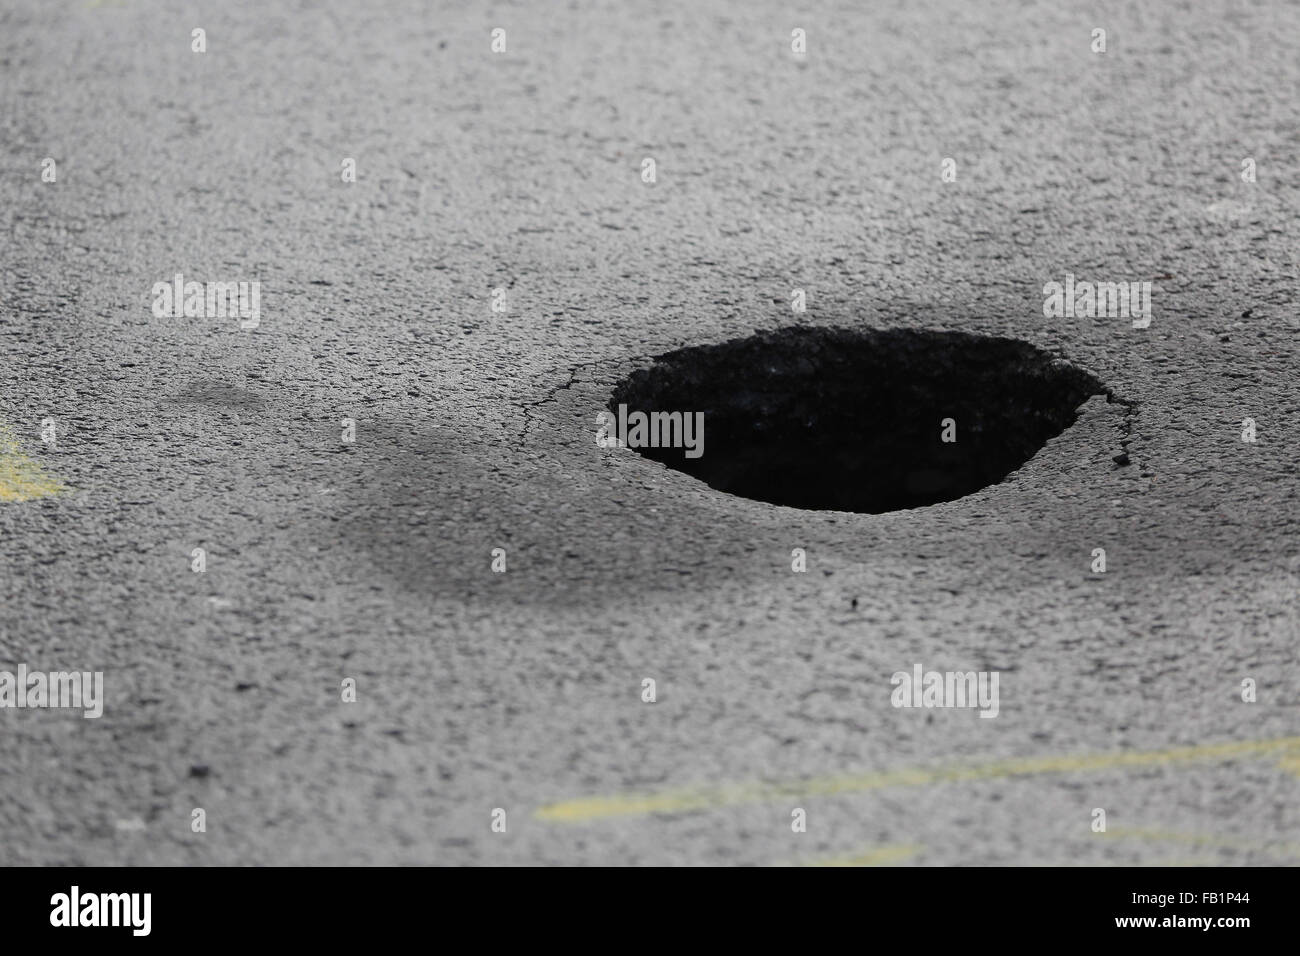 Neath, UK. Thursday 07 January 2016 The sinkhole in Cimla Road, Neath Re: A sinkhole up to 10ft deep has appeared in Neath. south Wales, leading to the closure of a main road. Police have sealed off Cimla Road, in Neath, following the discovery at the bottom of Cimla Hill. South Wales Police and Neath Port Talbot council workers are currently at the scene assessing the damage and preparing to carry out emergency repairs. Credit:  D Legakis/Alamy Live News Stock Photo